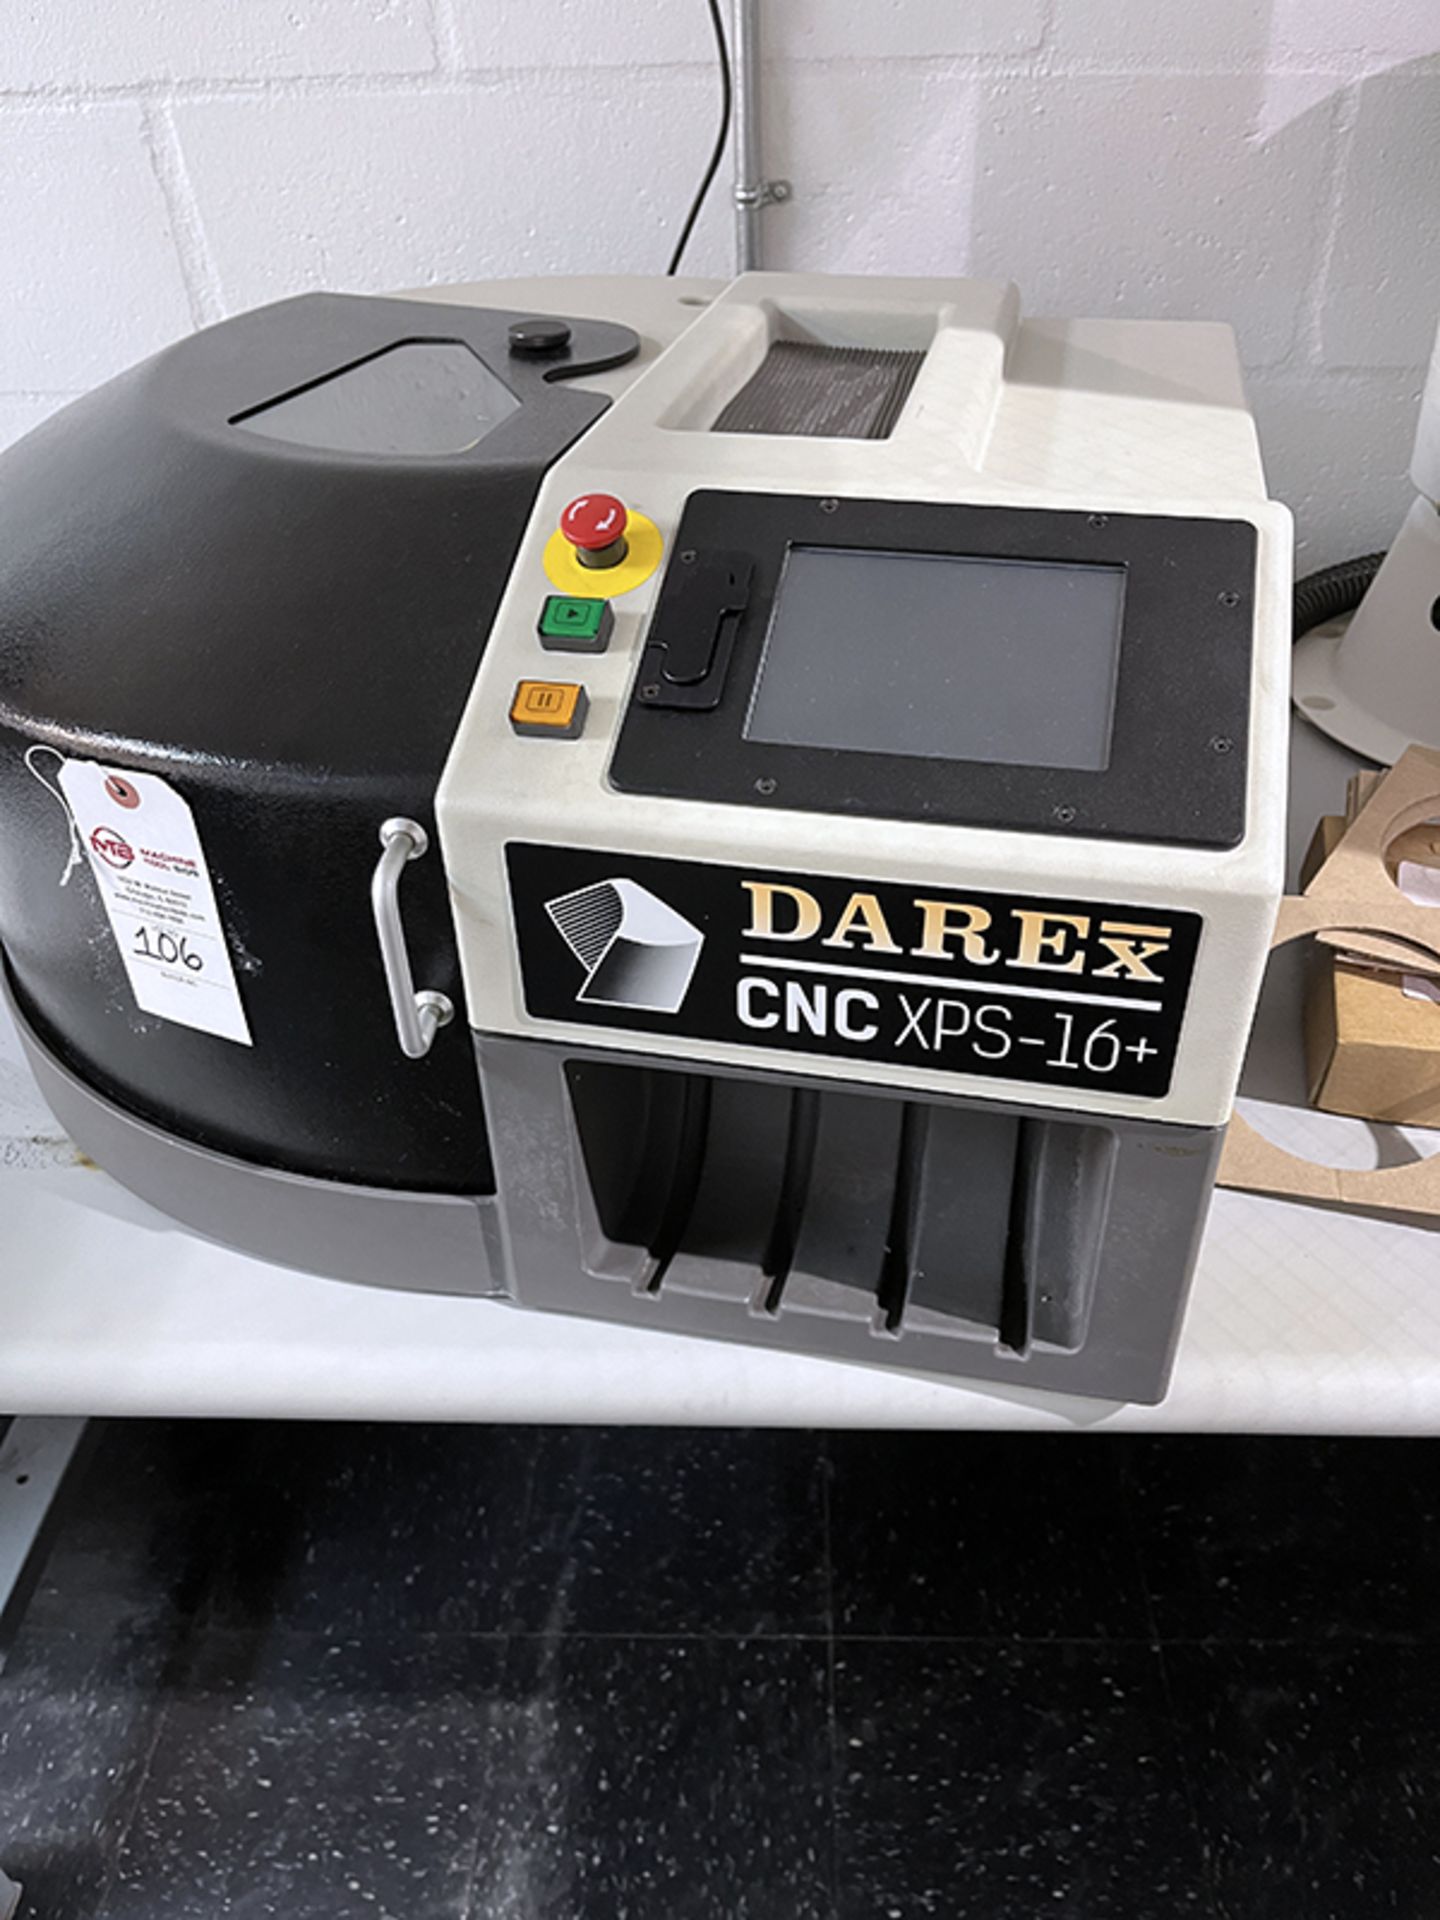 Darex CNC XPS-16 + 4 Axis CNC Drill Grinder & Sharpener (2017) - Image 10 of 13